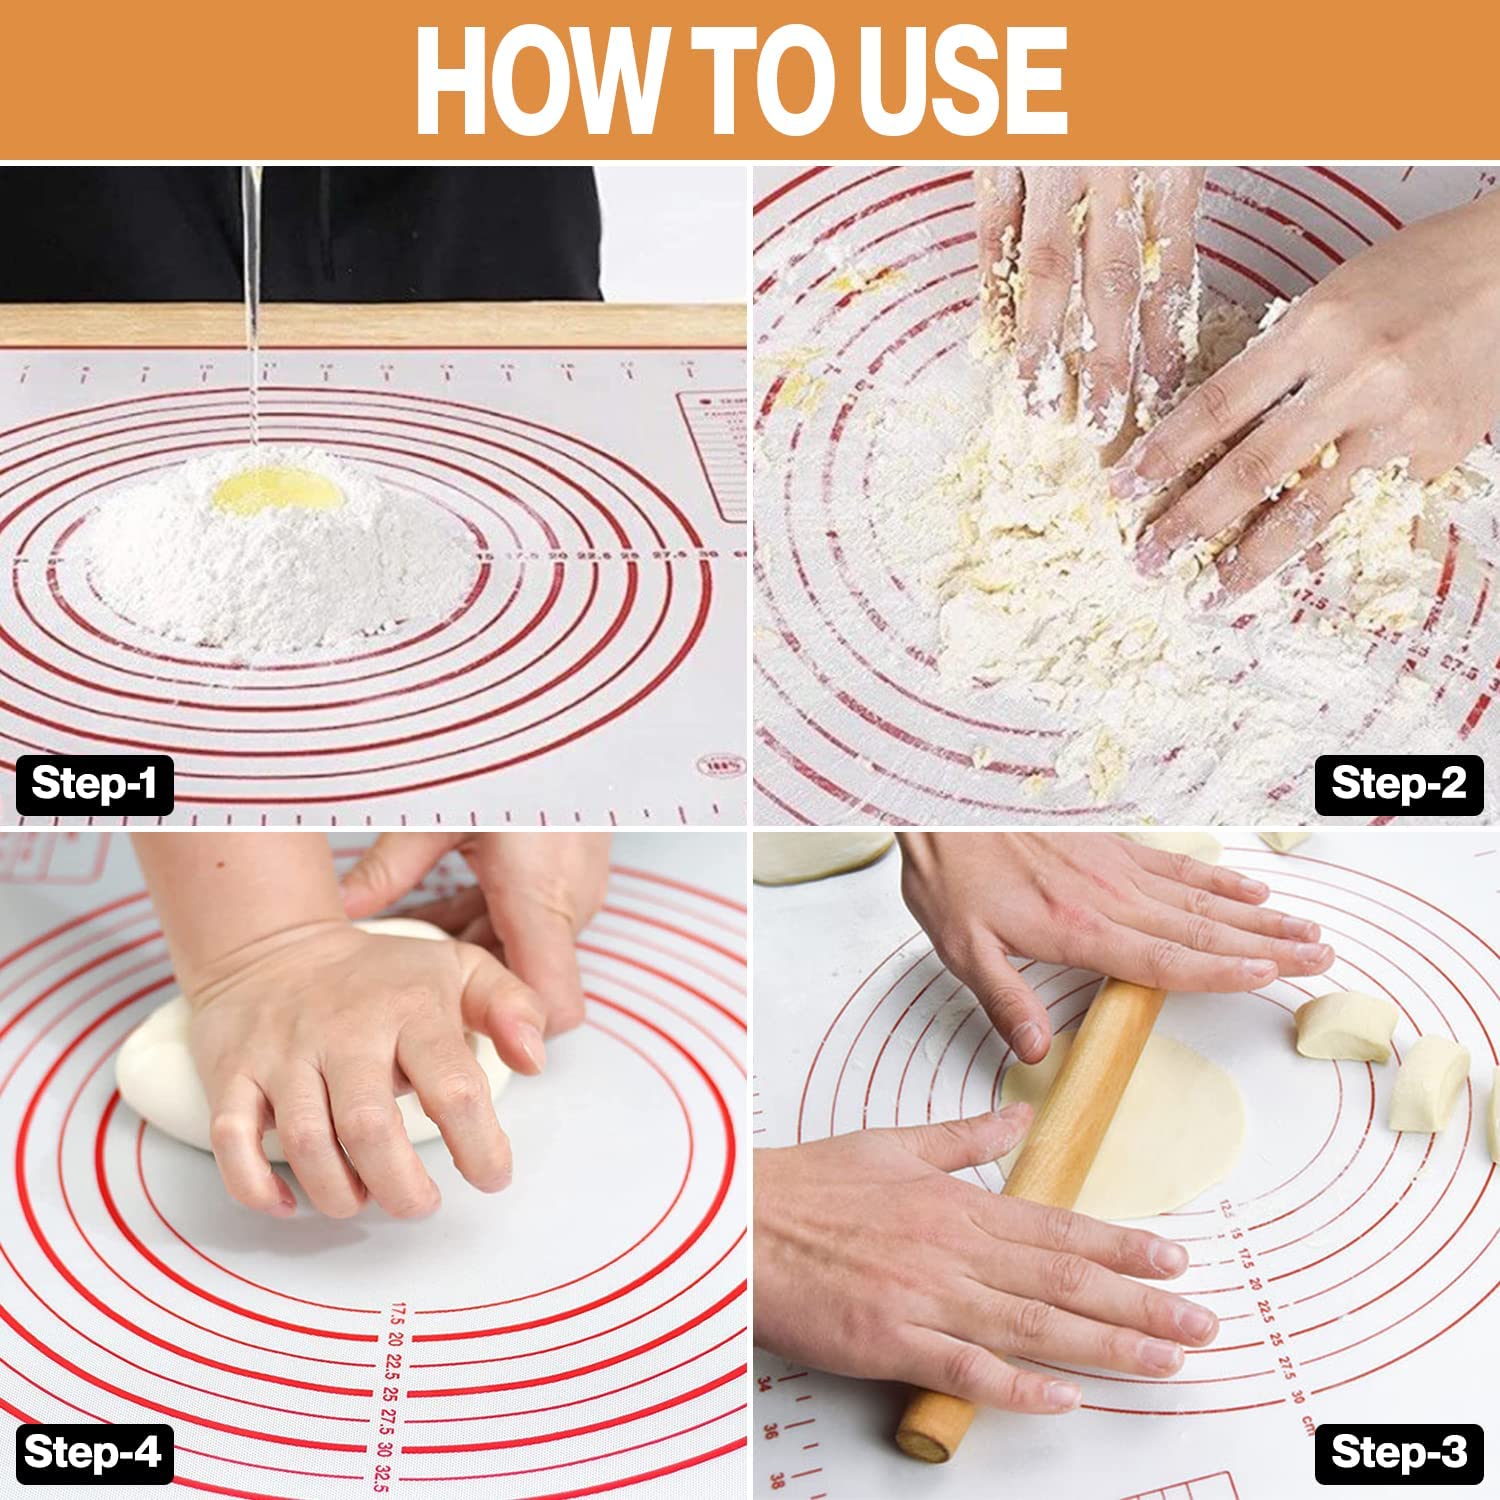 Non-Stick Rolling Dough Mat, Silicone Baking Mat with Measurement Scale,  Bakeware Table Mats, Kitchen Tools - AliExpress